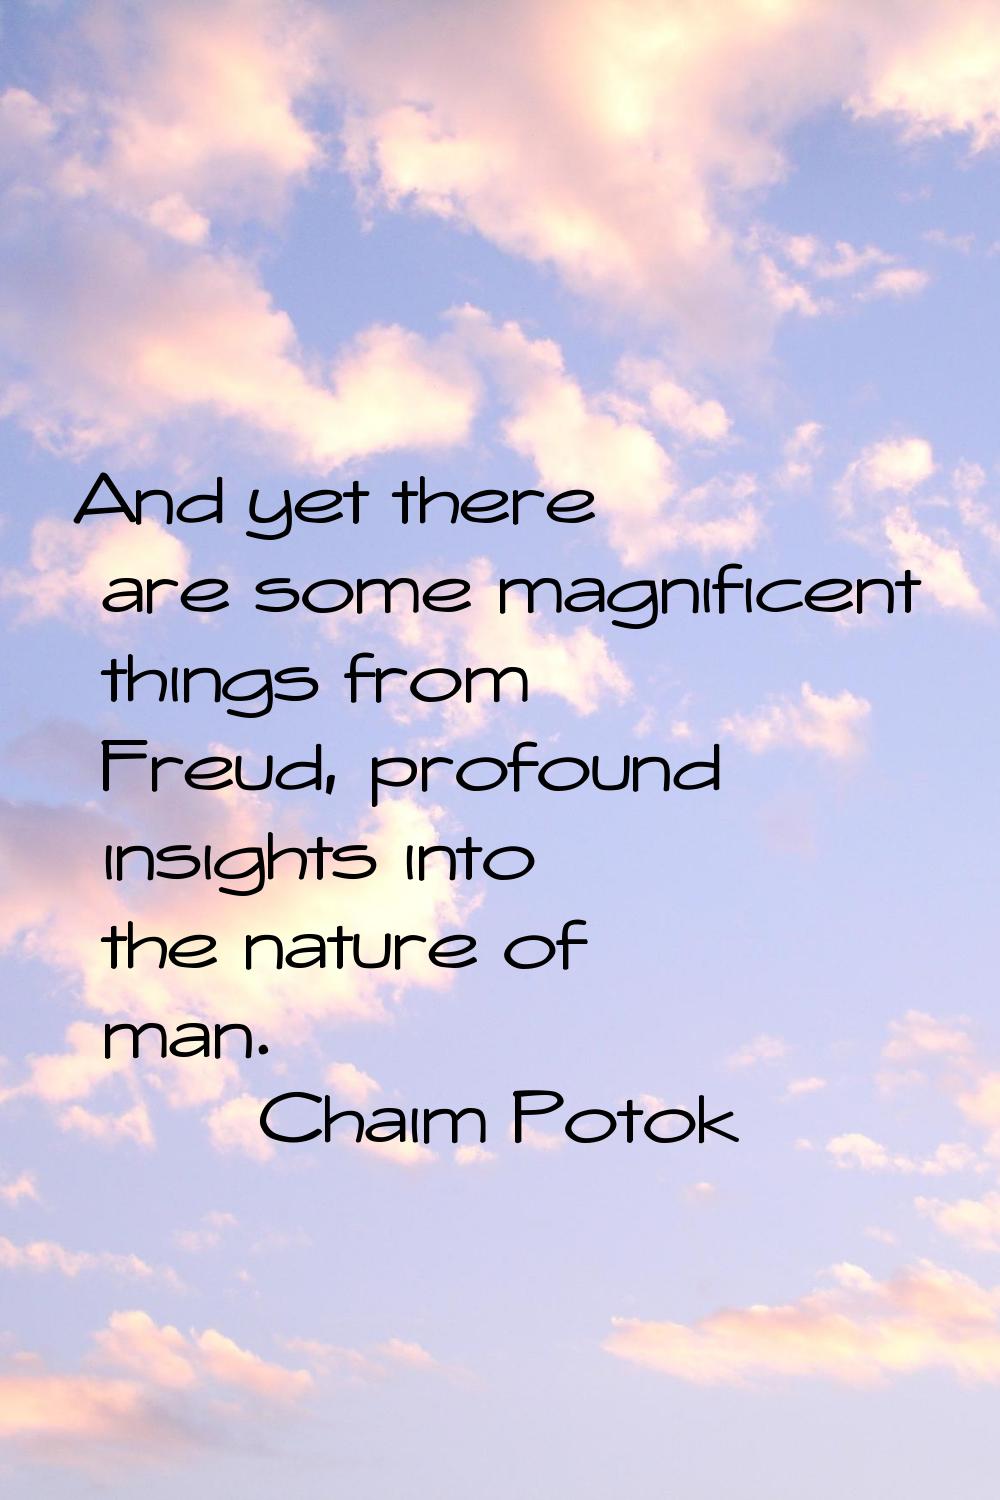 And yet there are some magnificent things from Freud, profound insights into the nature of man.